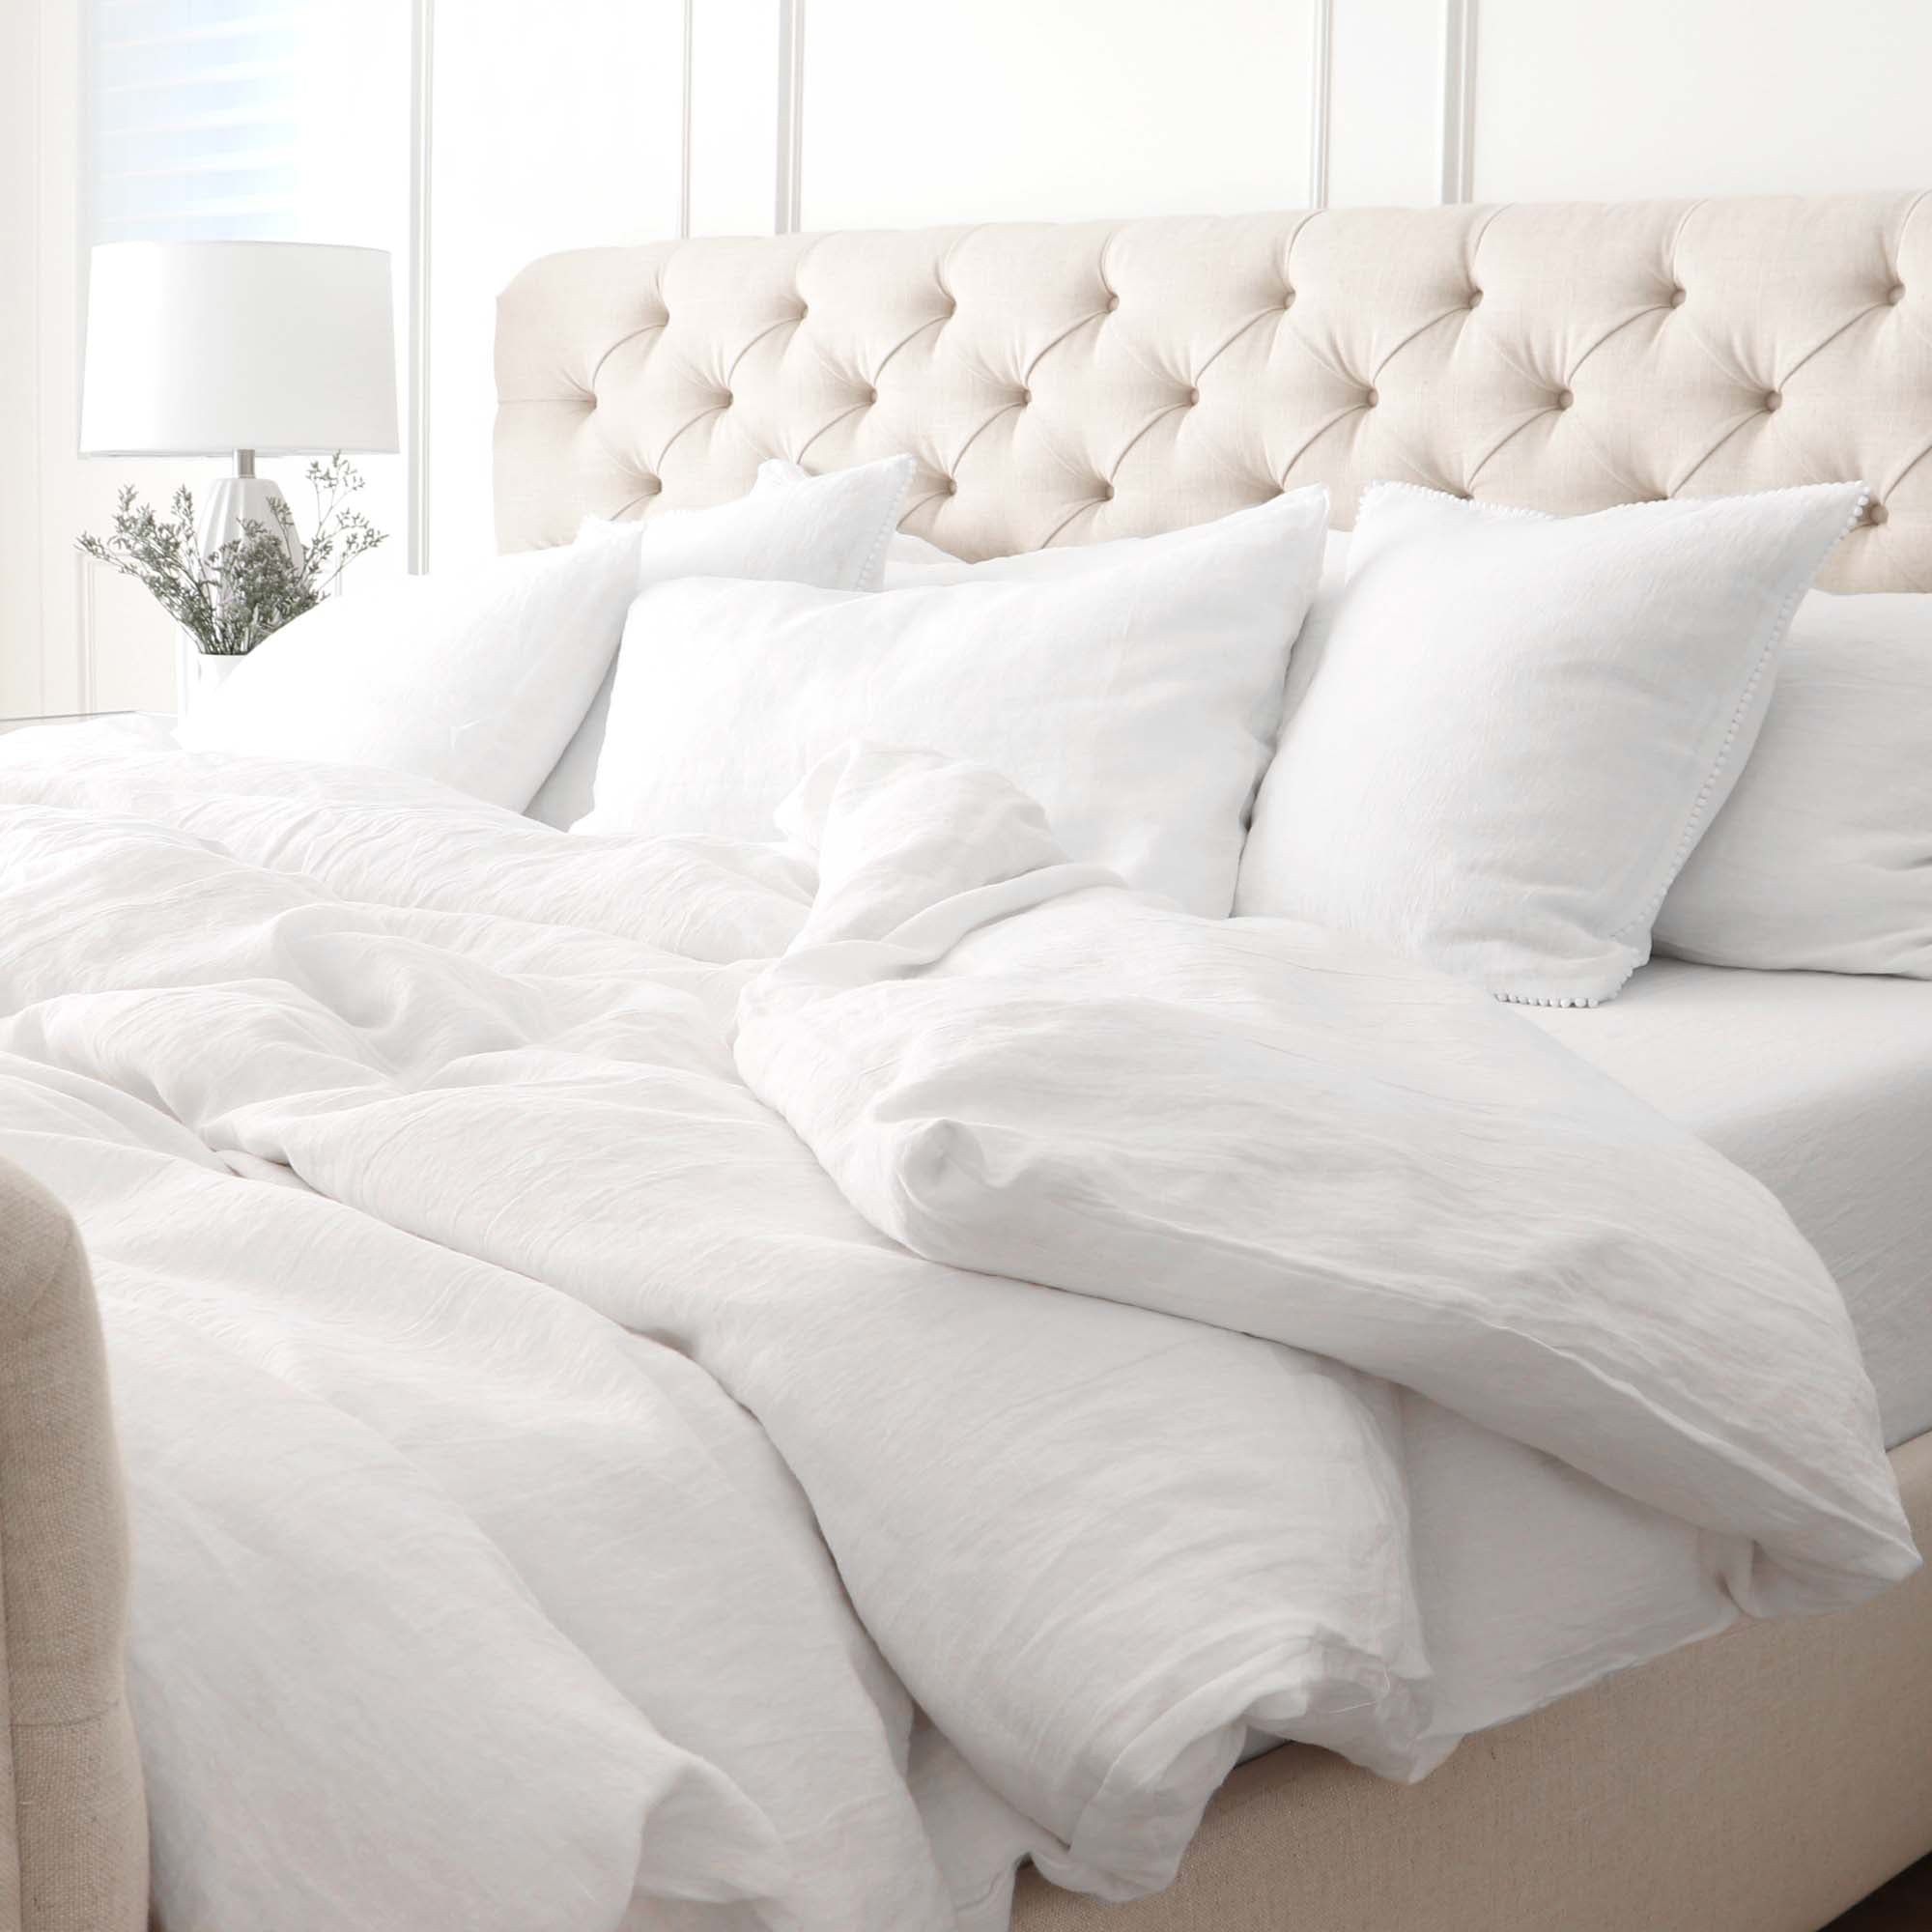 https://cdn.shopify.com/s/files/1/1116/9186/products/European_White_Linen_OEKO-TEX_Bedding_with_Pillow_Case_Covers_with_Duvet_2000x.jpg?v=1606881796